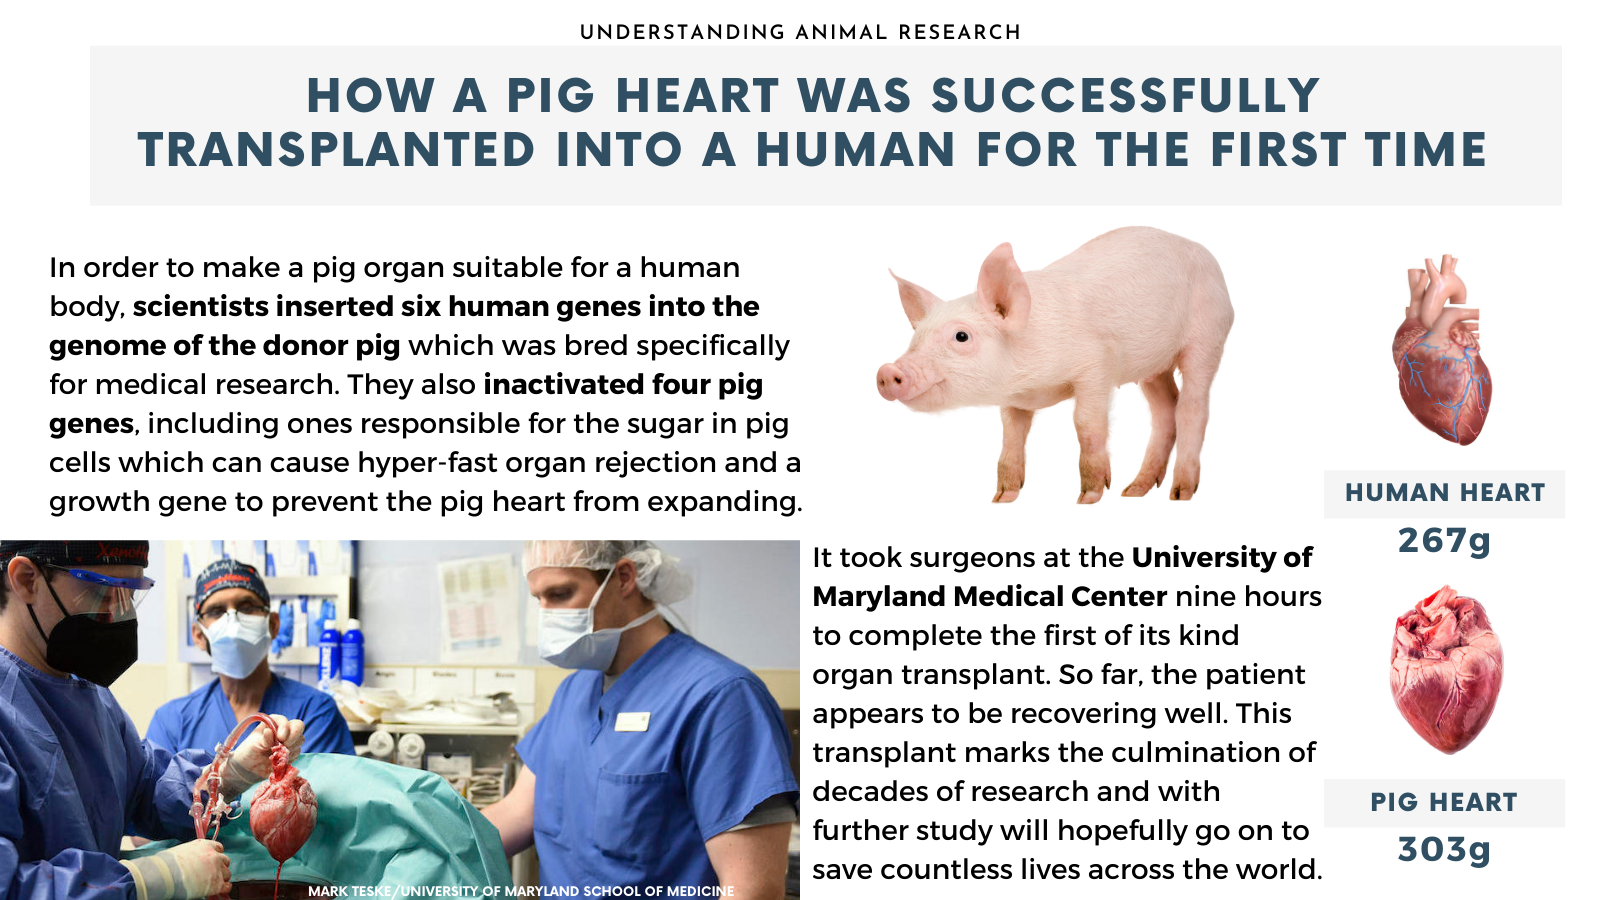 How a pig heart was transplanted into a human